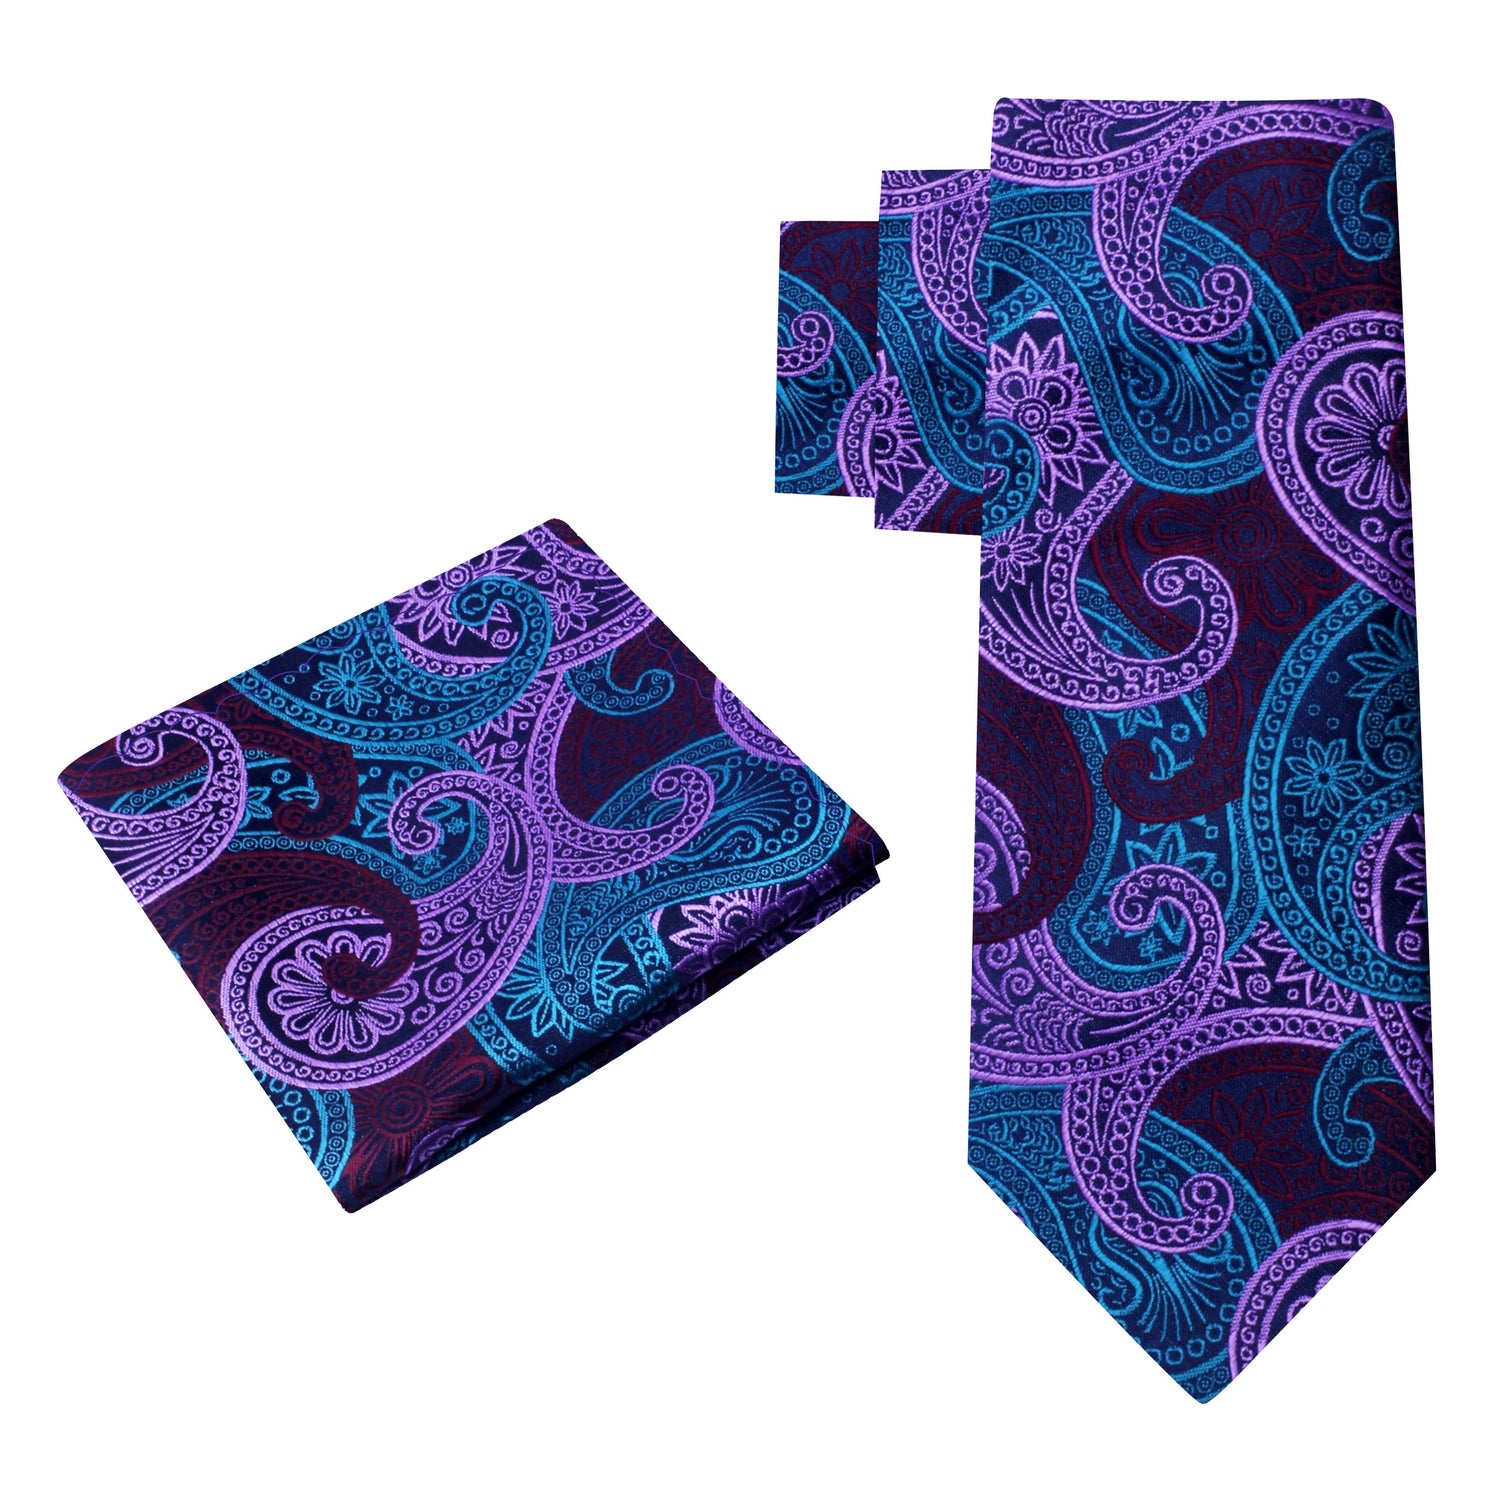 Alt View: A Light Purple, Teal, Purple Paisley Pattern Necktie With Matching Pocket Square